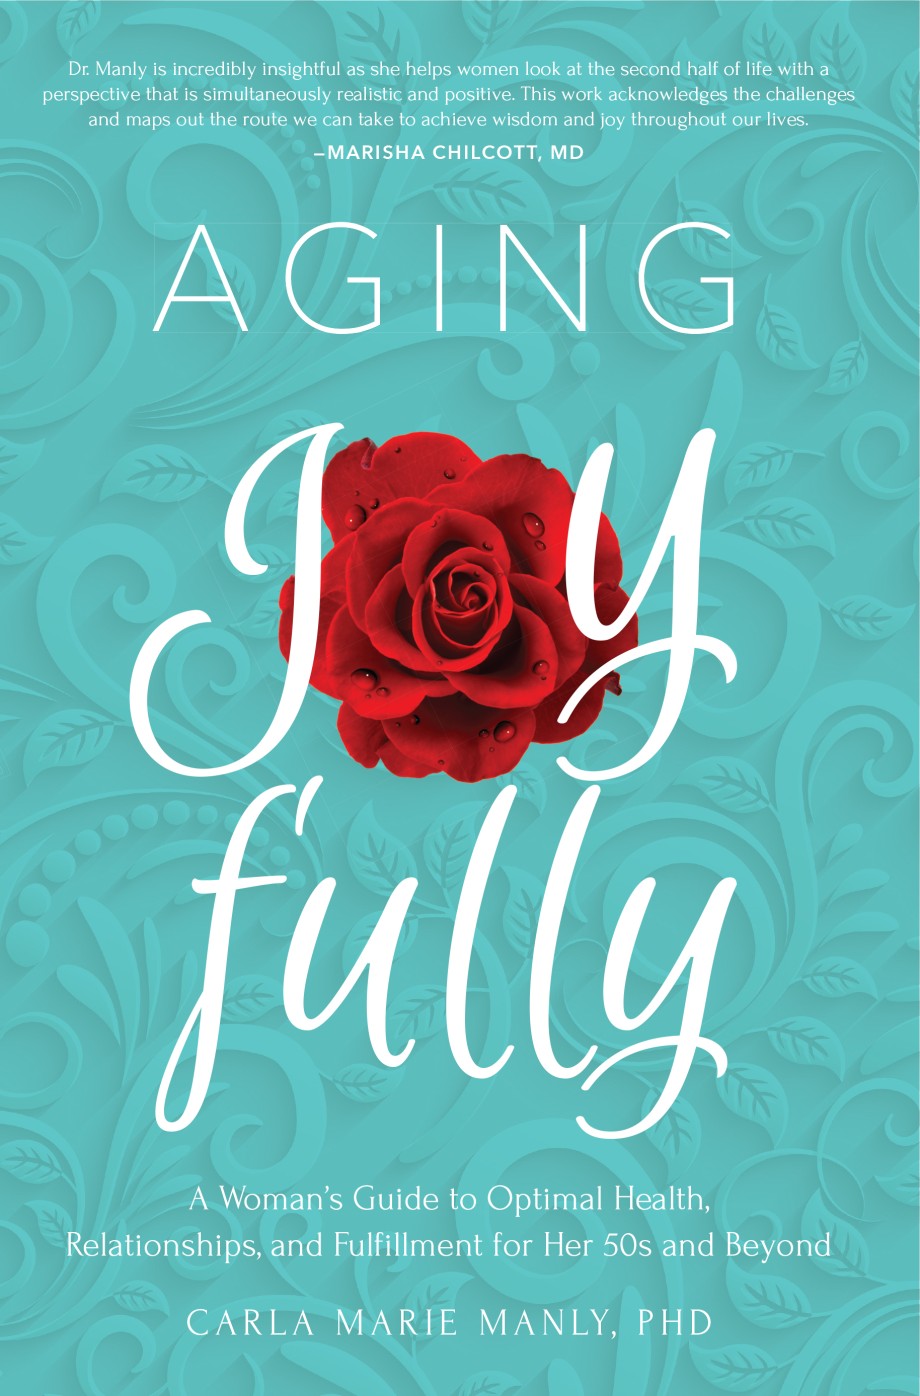 Aging Joyfully A Woman’s Guide to Optimal Health, Relationships, and Fulfillment for Her 50s and Beyond